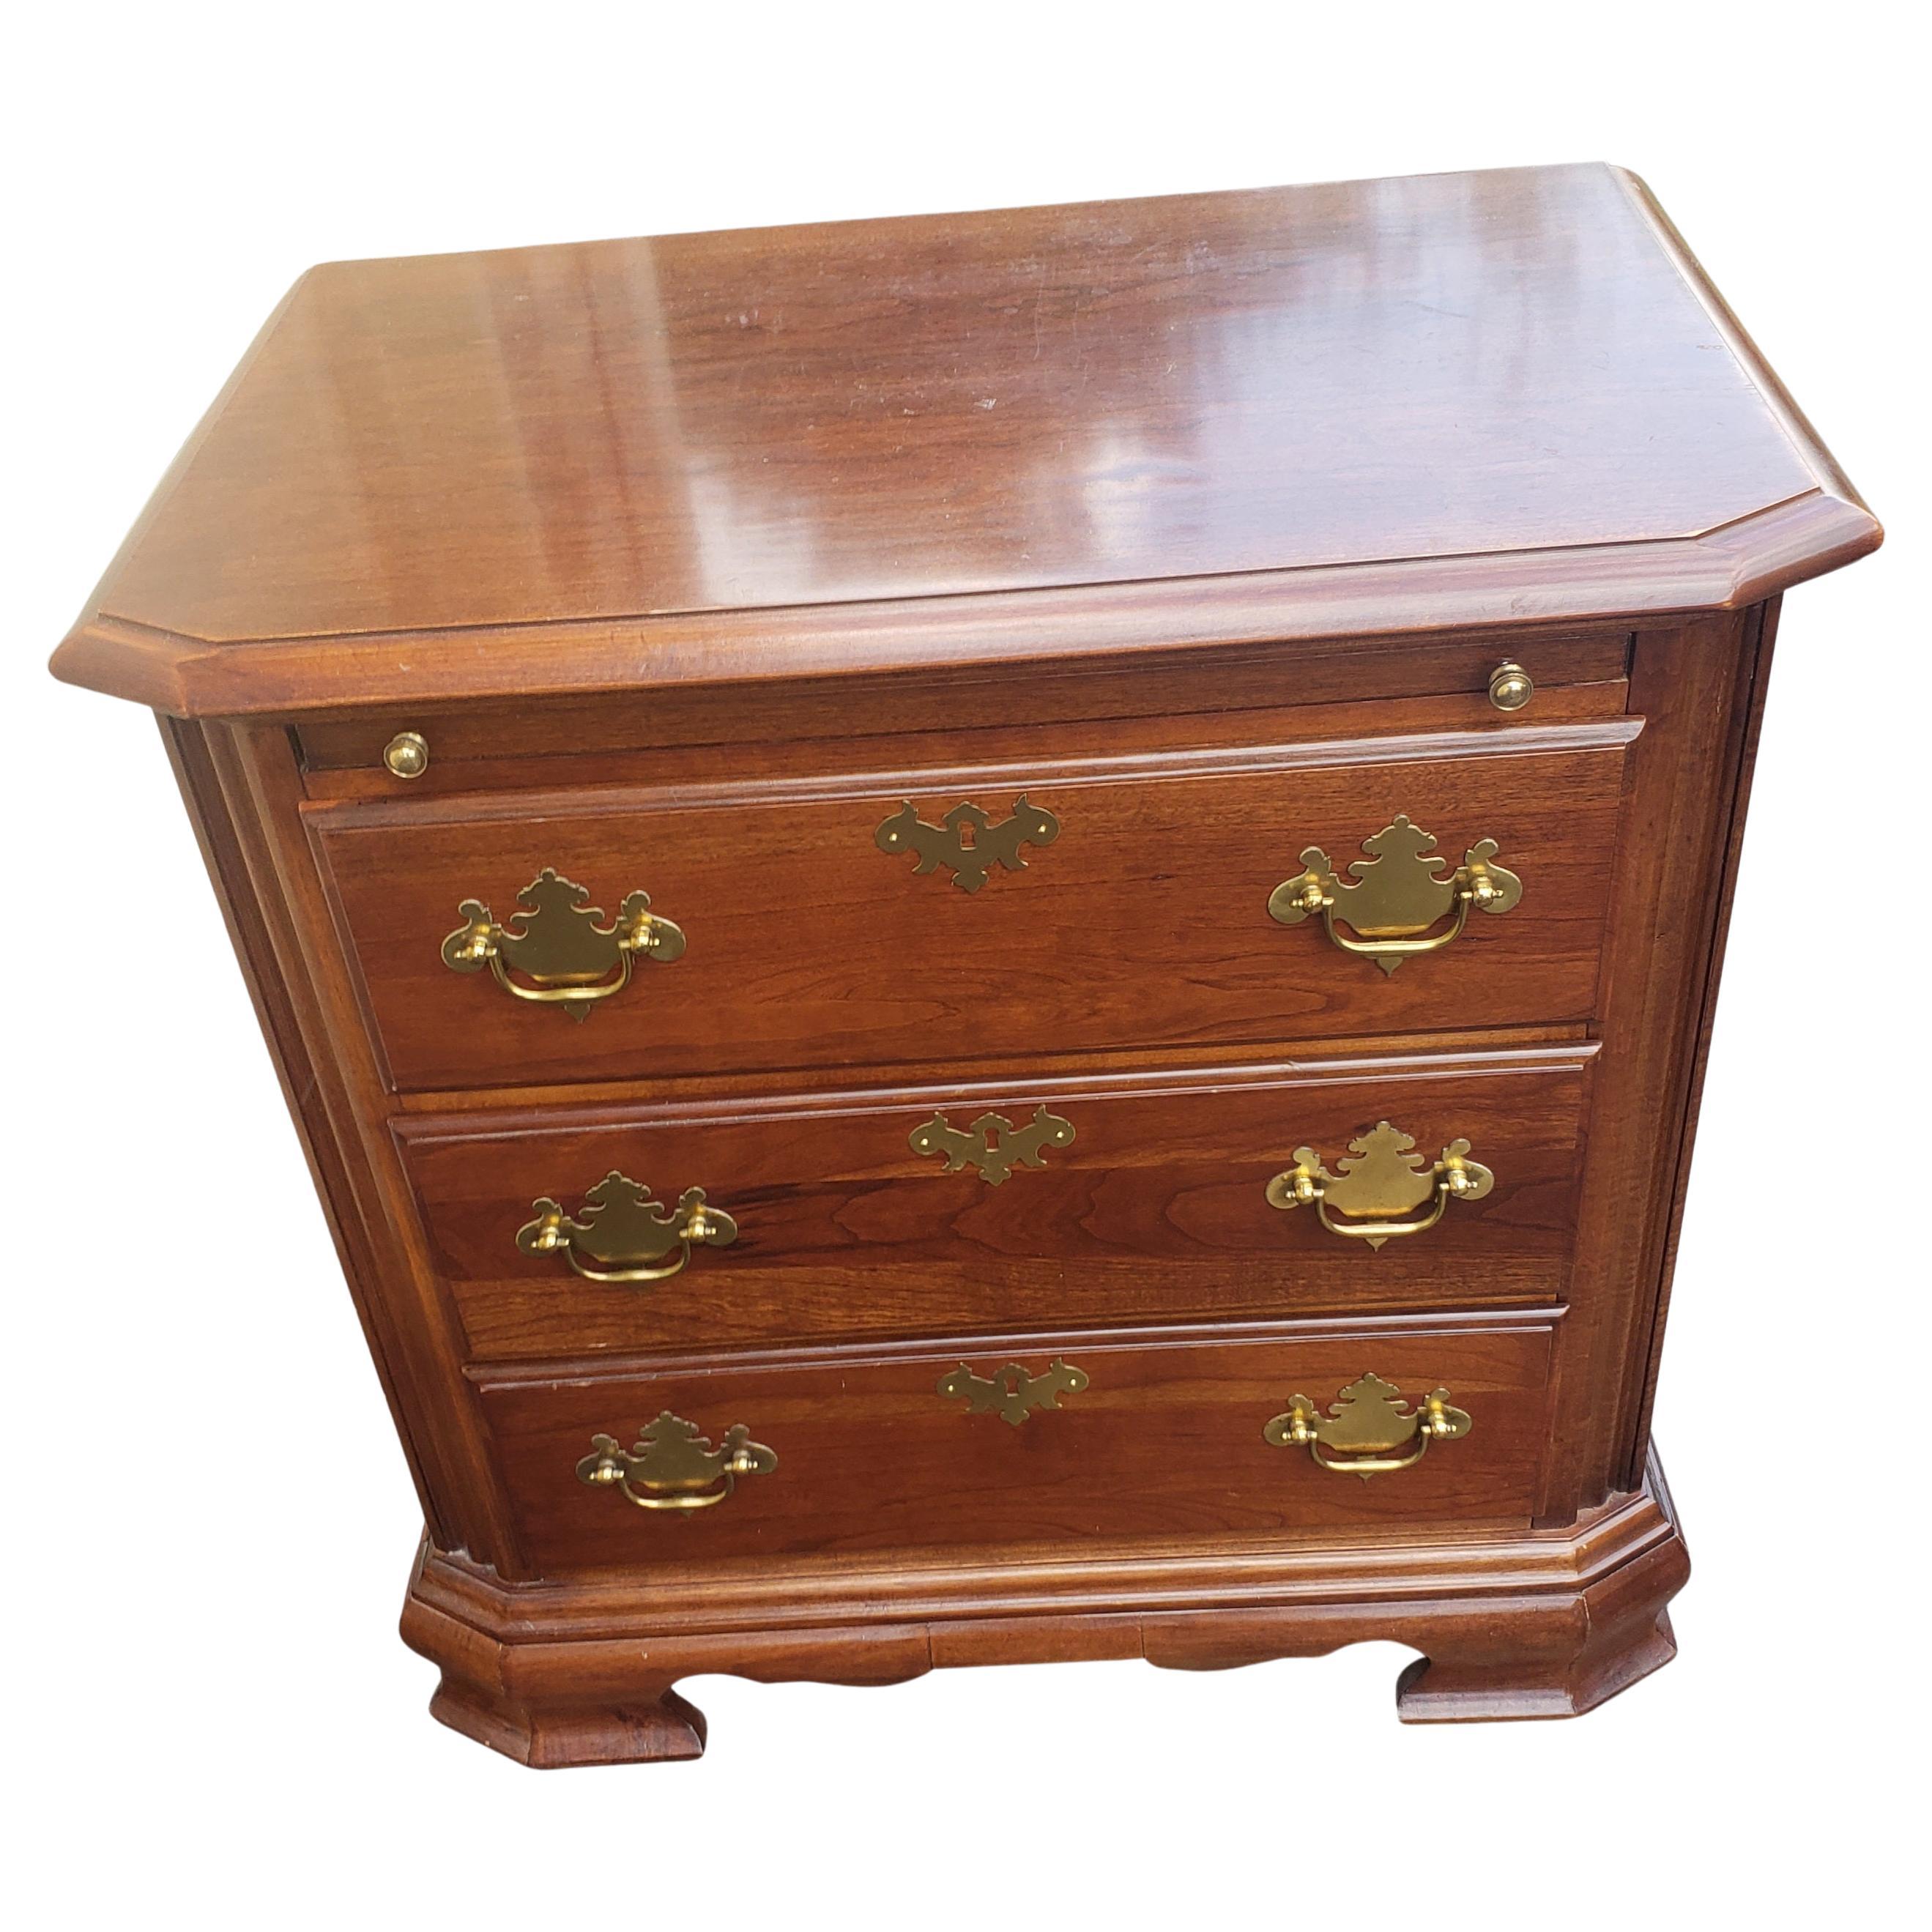 Beautifully crafted Chippendale bedside tables from American Craftman Collection by Stanley Furniture. Solid cherry with brass handles. Pull out tray, smooth dovetailed drawers. Very good condition. Minor wear, appropriate with age and